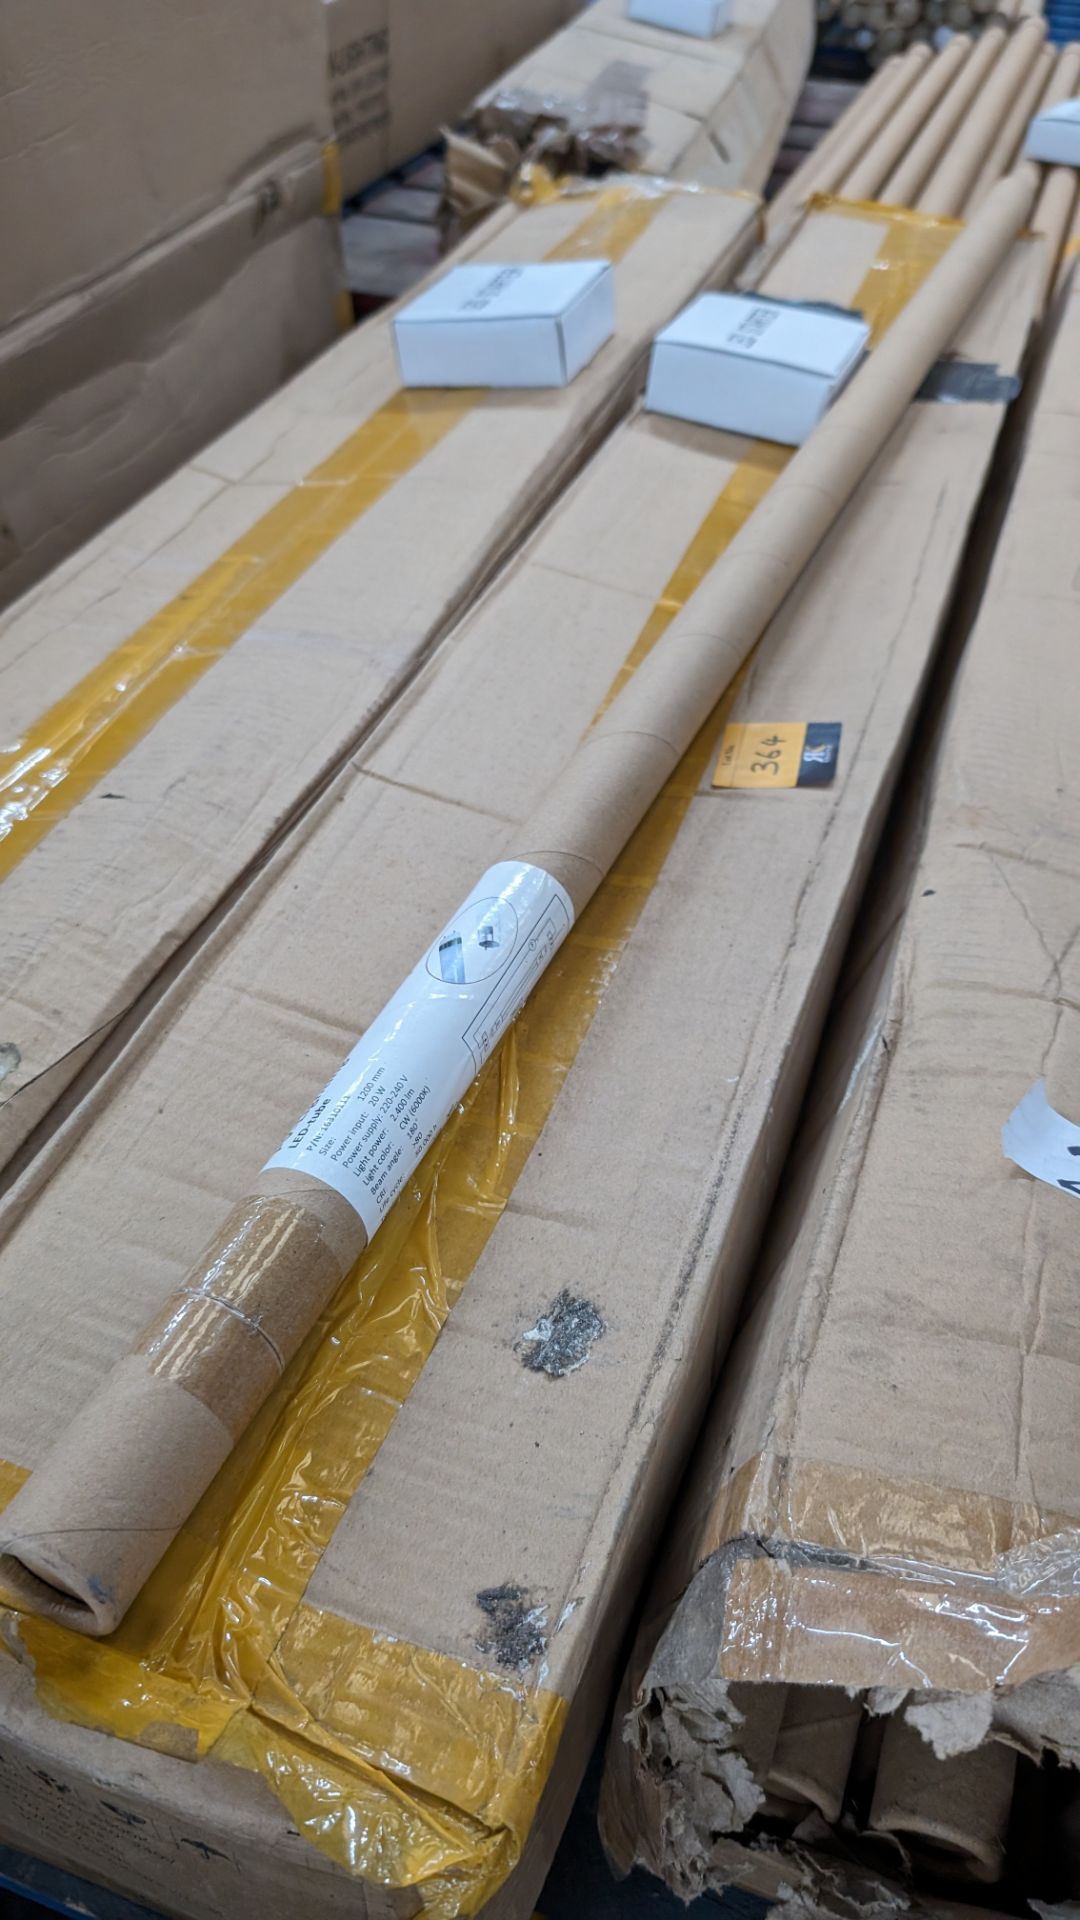 5 boxes of 1200mm LED 20w tubes - 4 boxes of cold white and 1 box of natural white. Approximately 1 - Image 6 of 6